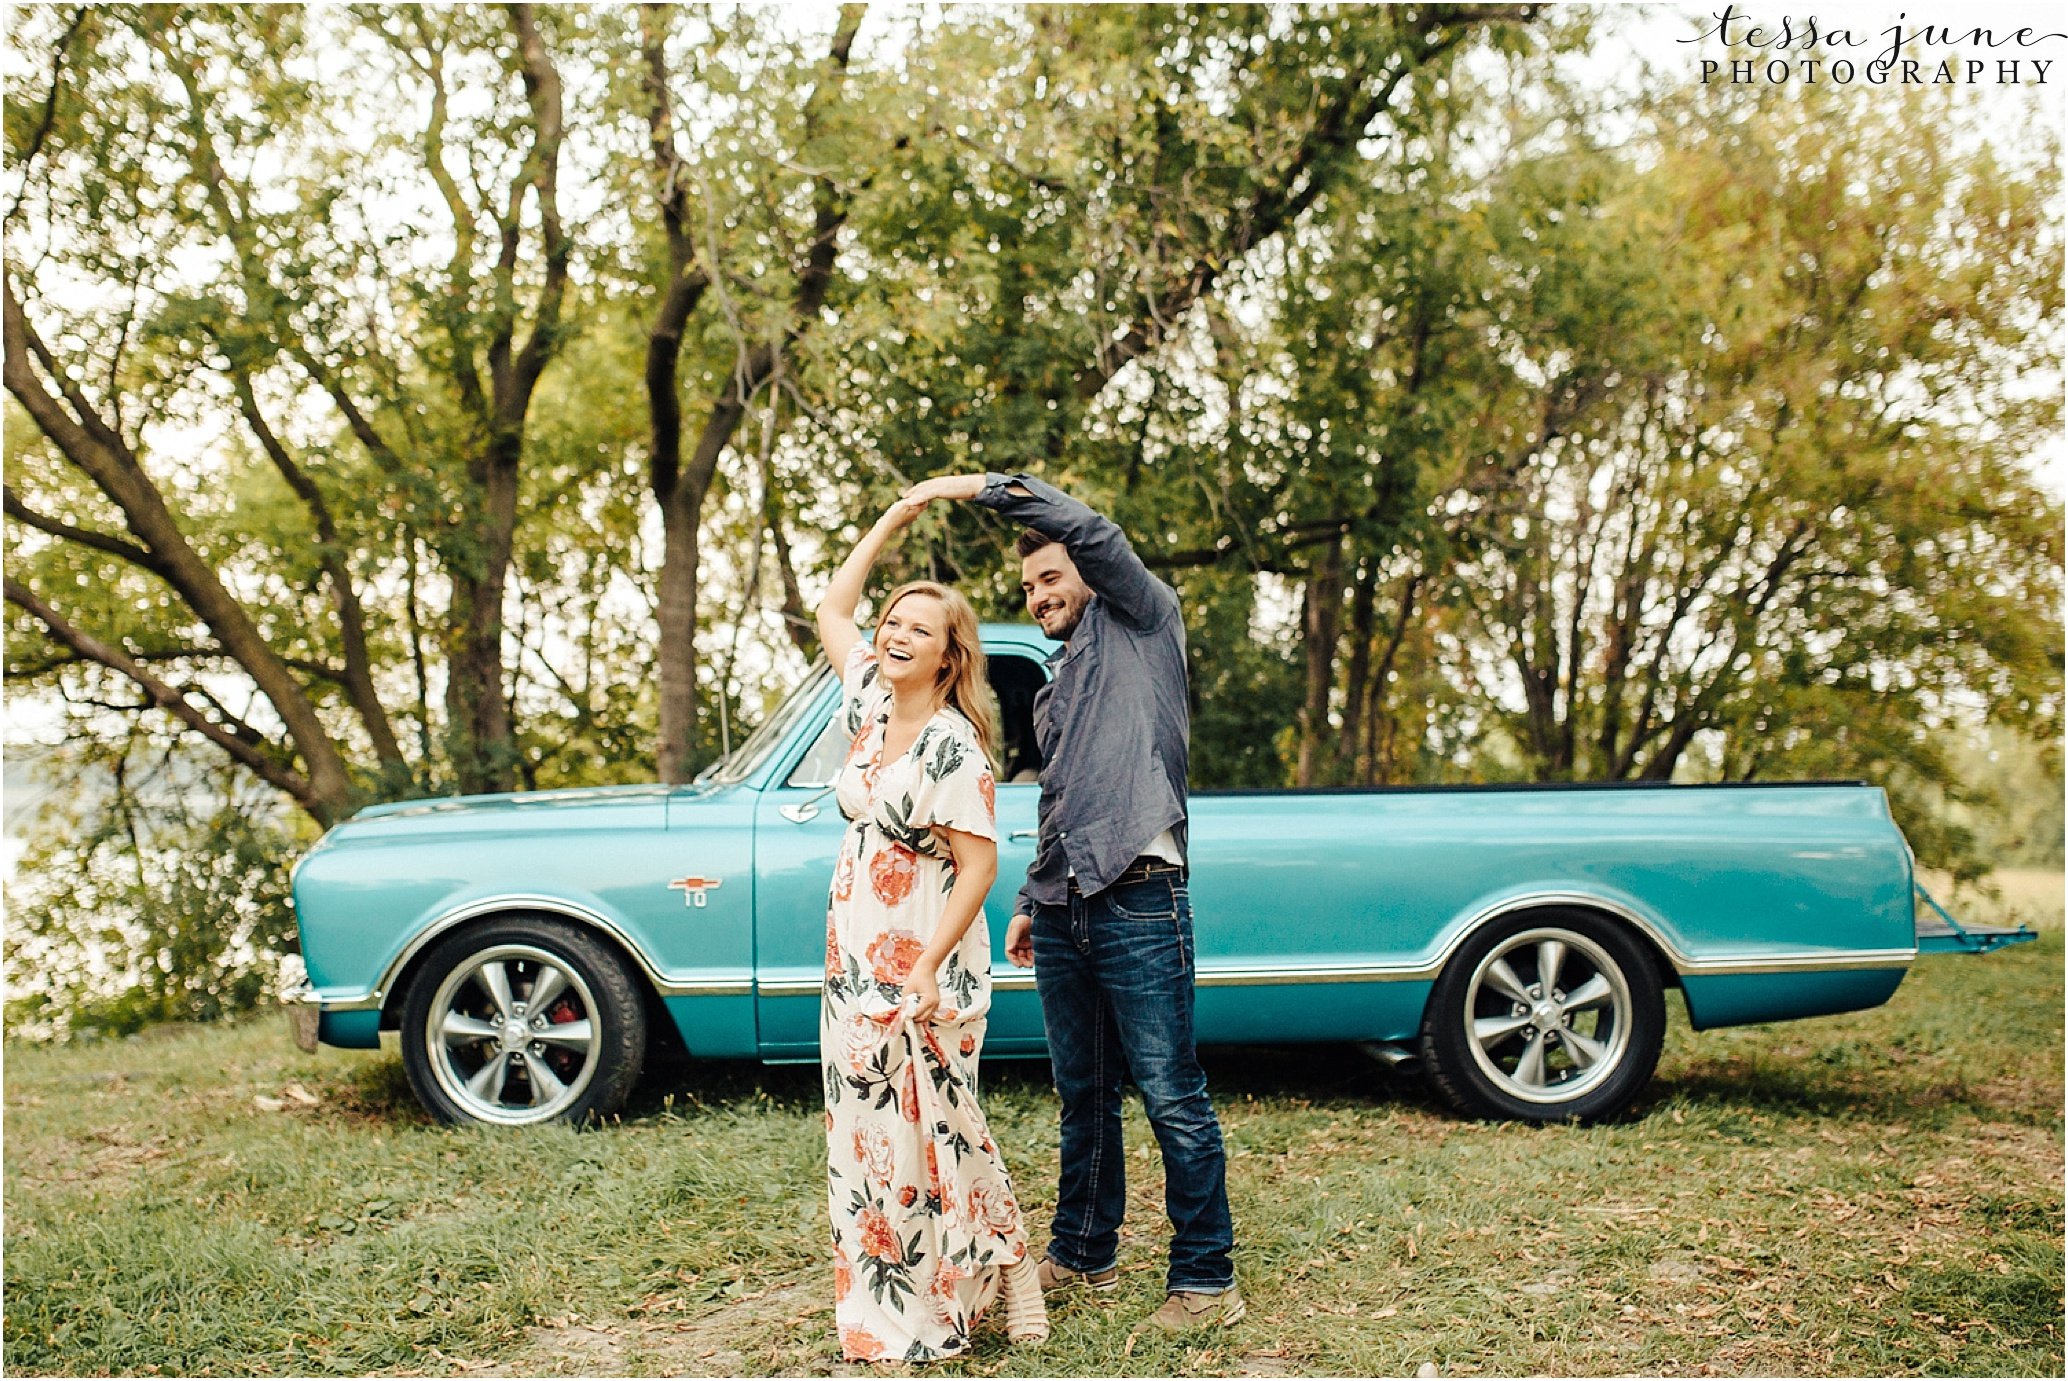 st-cloud-wedding-photographer-engagement-session-with-old-truck-36.jpeg